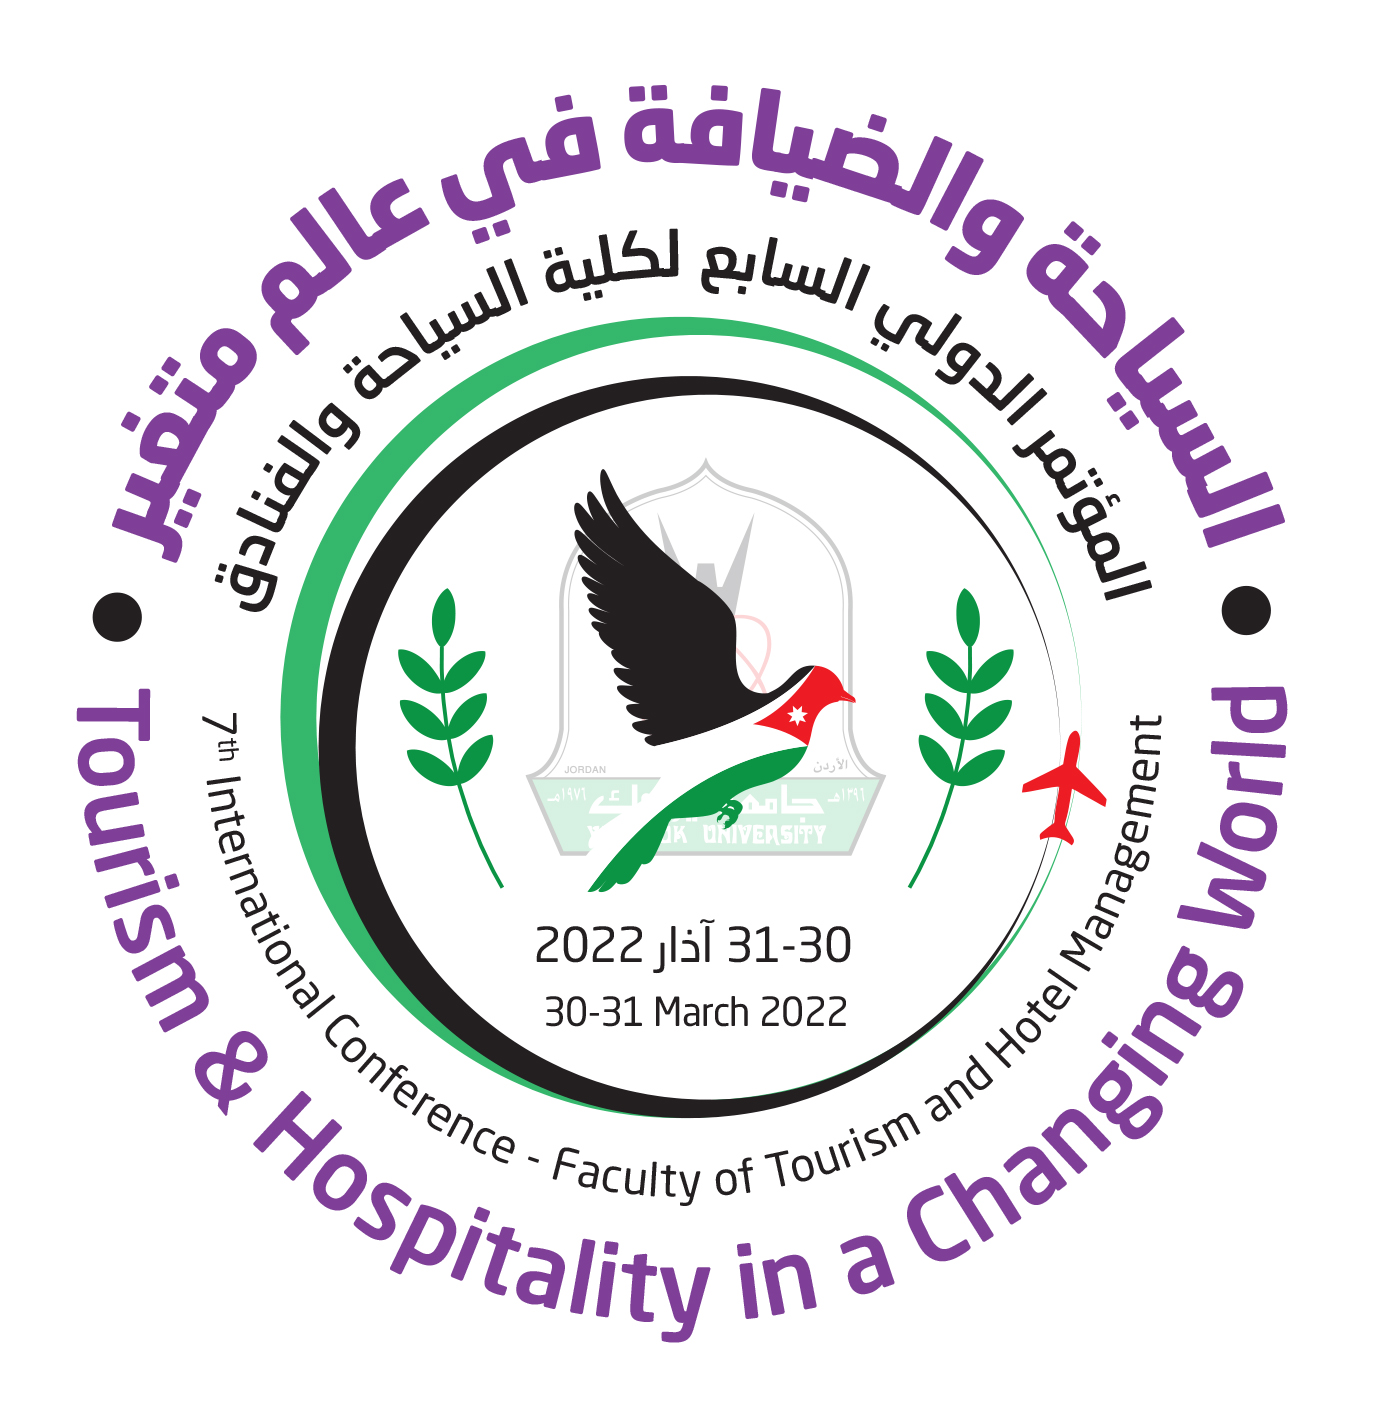 The 7th Conference of the Faculty of Tourism and Hotel Management 